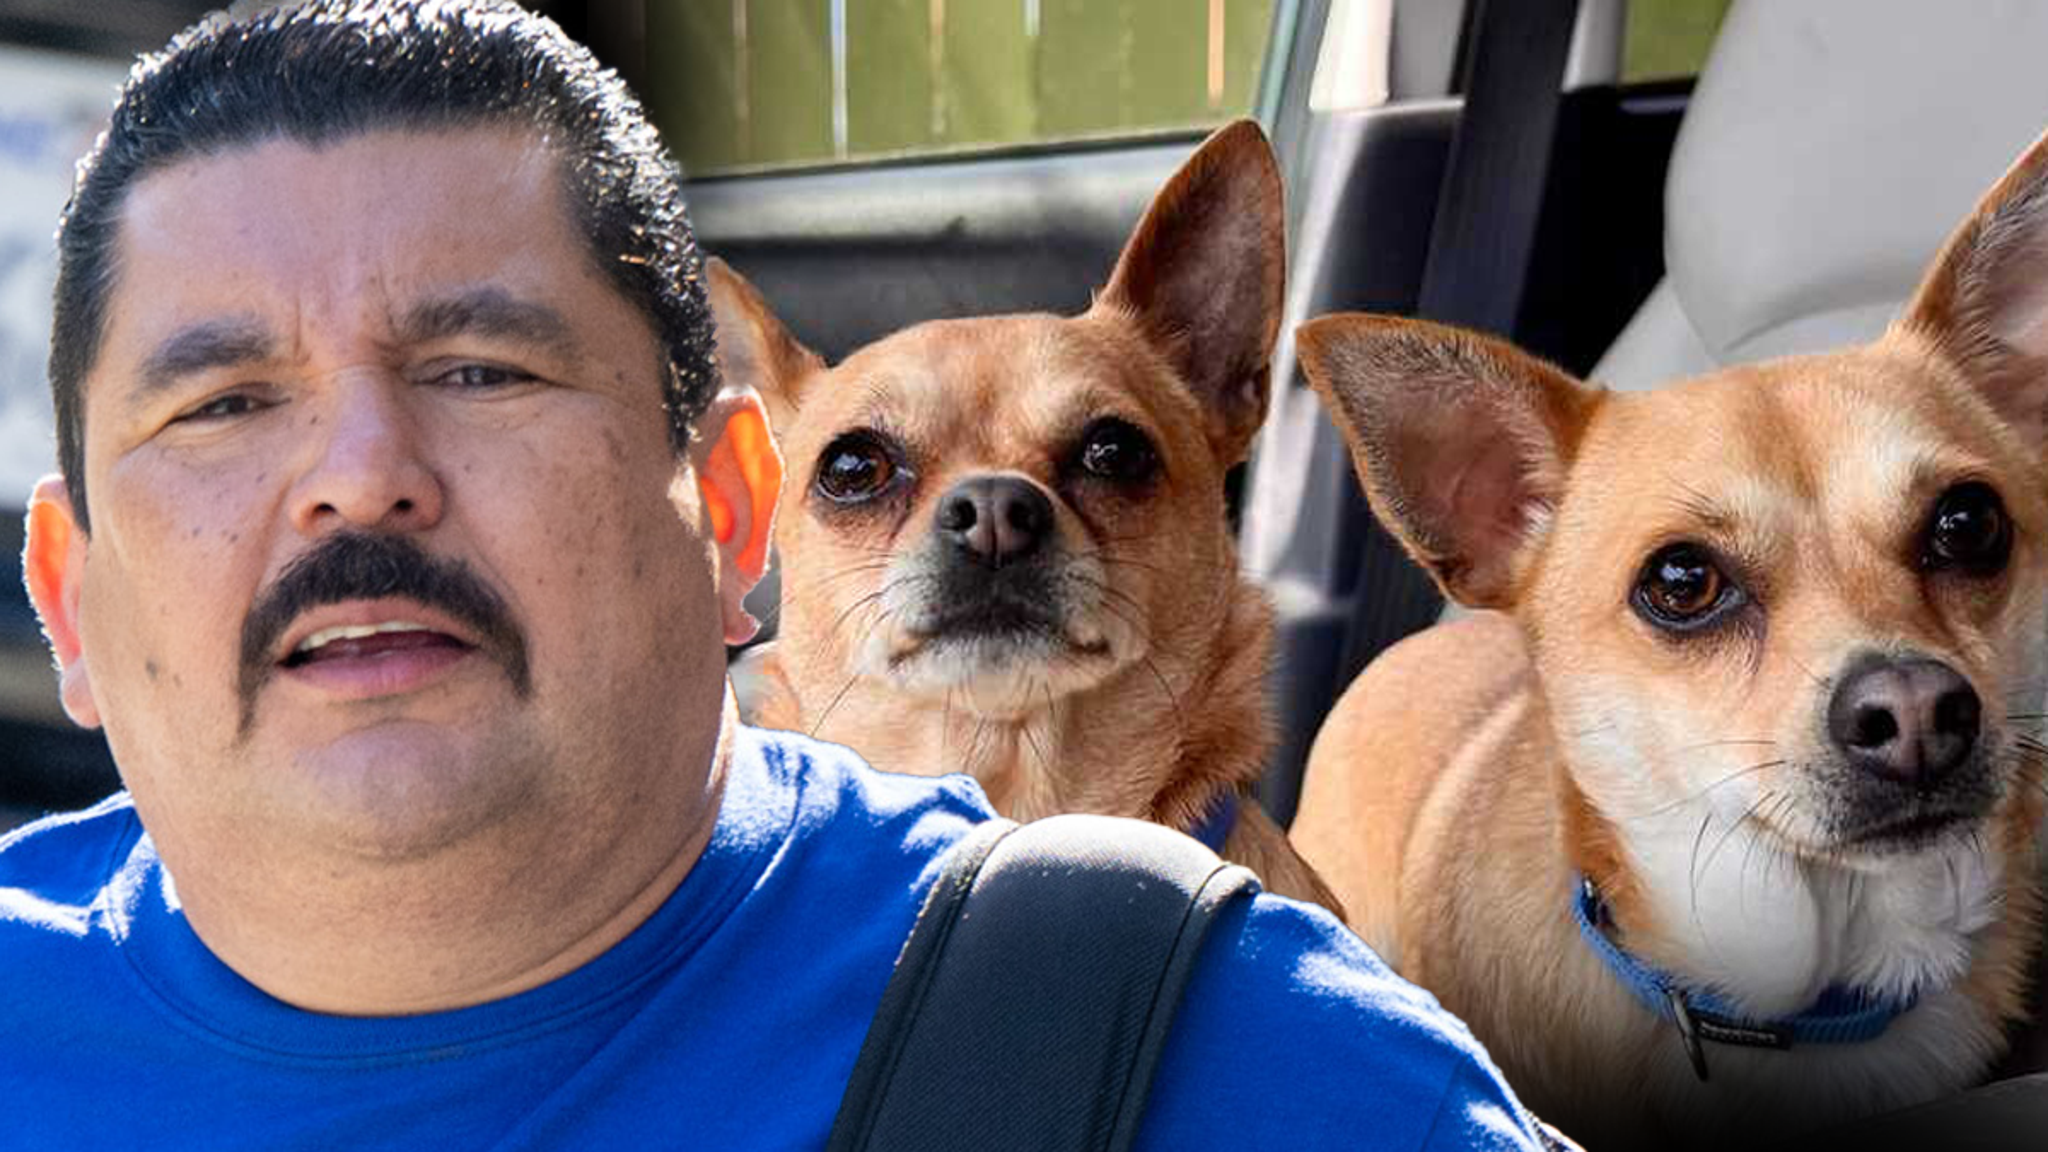 ‘Kimmel Live’ Star Guillermo Apologizes for Rescue Dogs Ending Up at Shelter